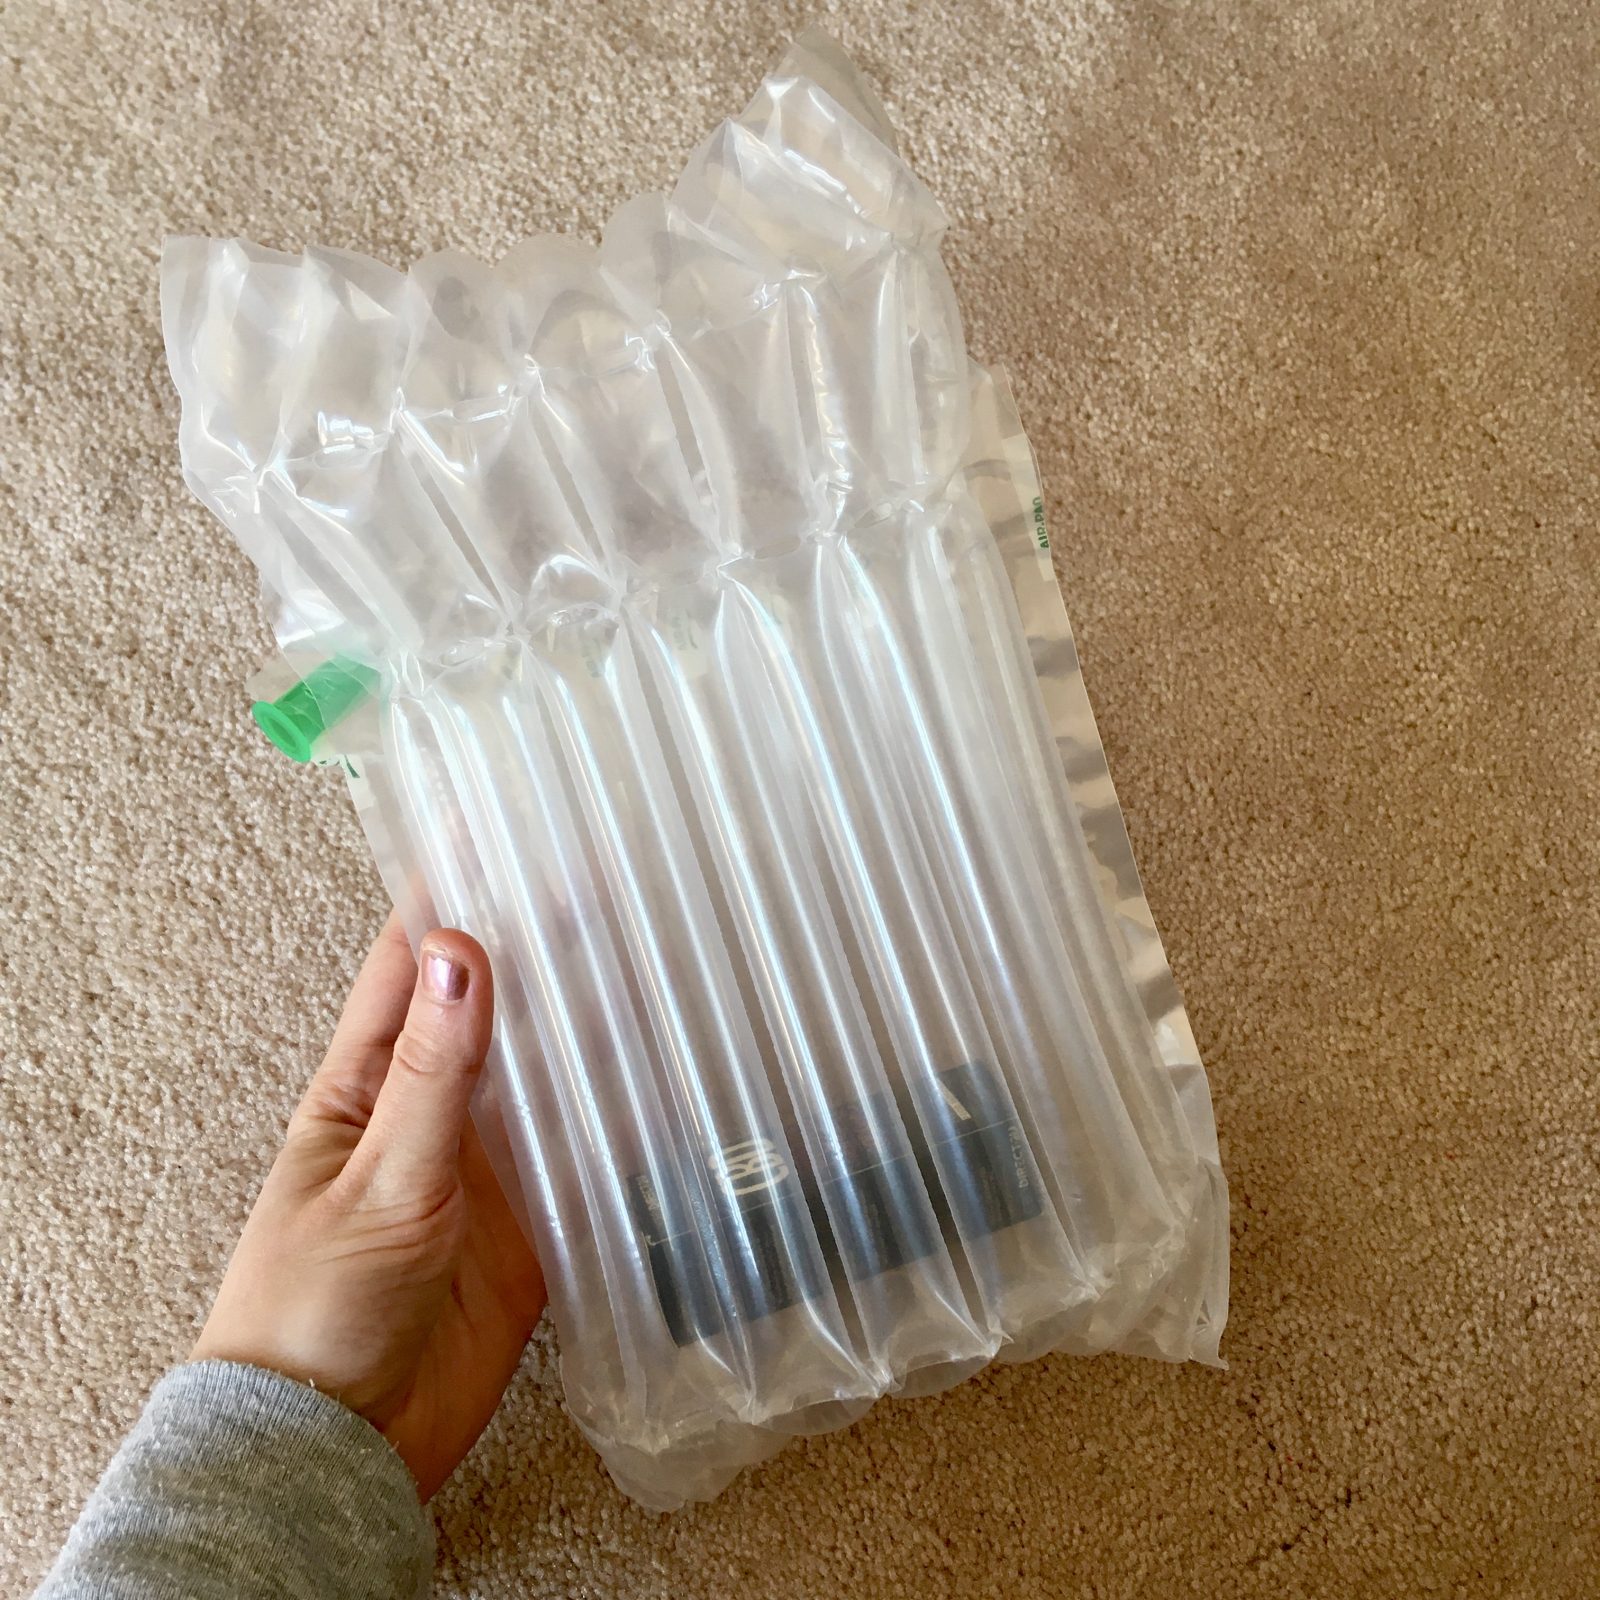 pippa's hand holding inflated protective see-through bag, with CBD oil enclosed